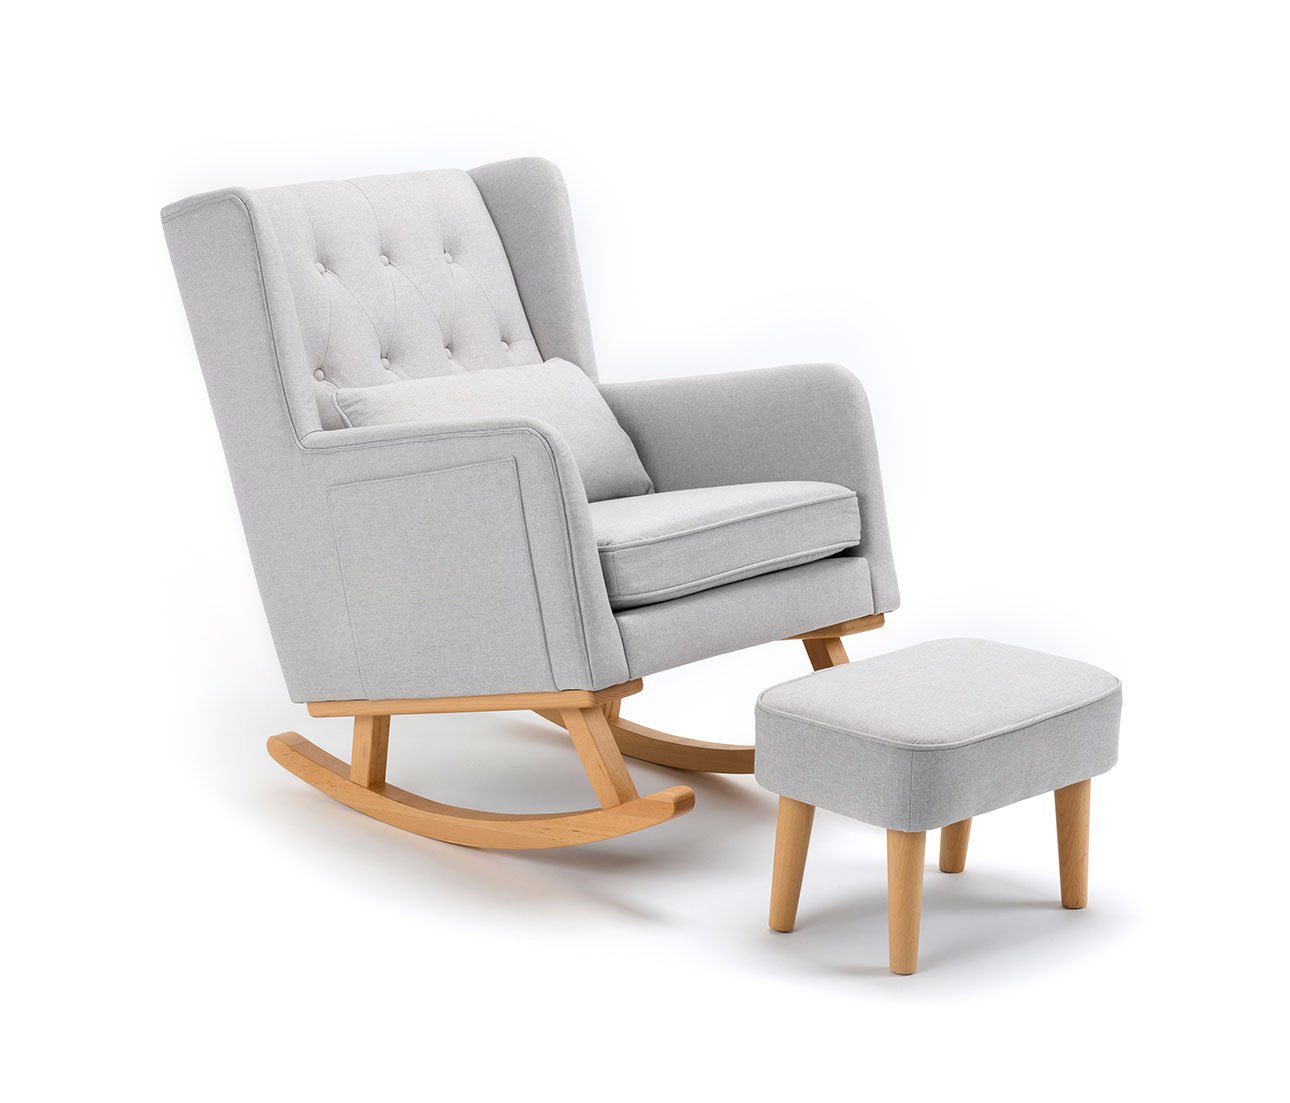 Lux nursing chair with footstool - grey